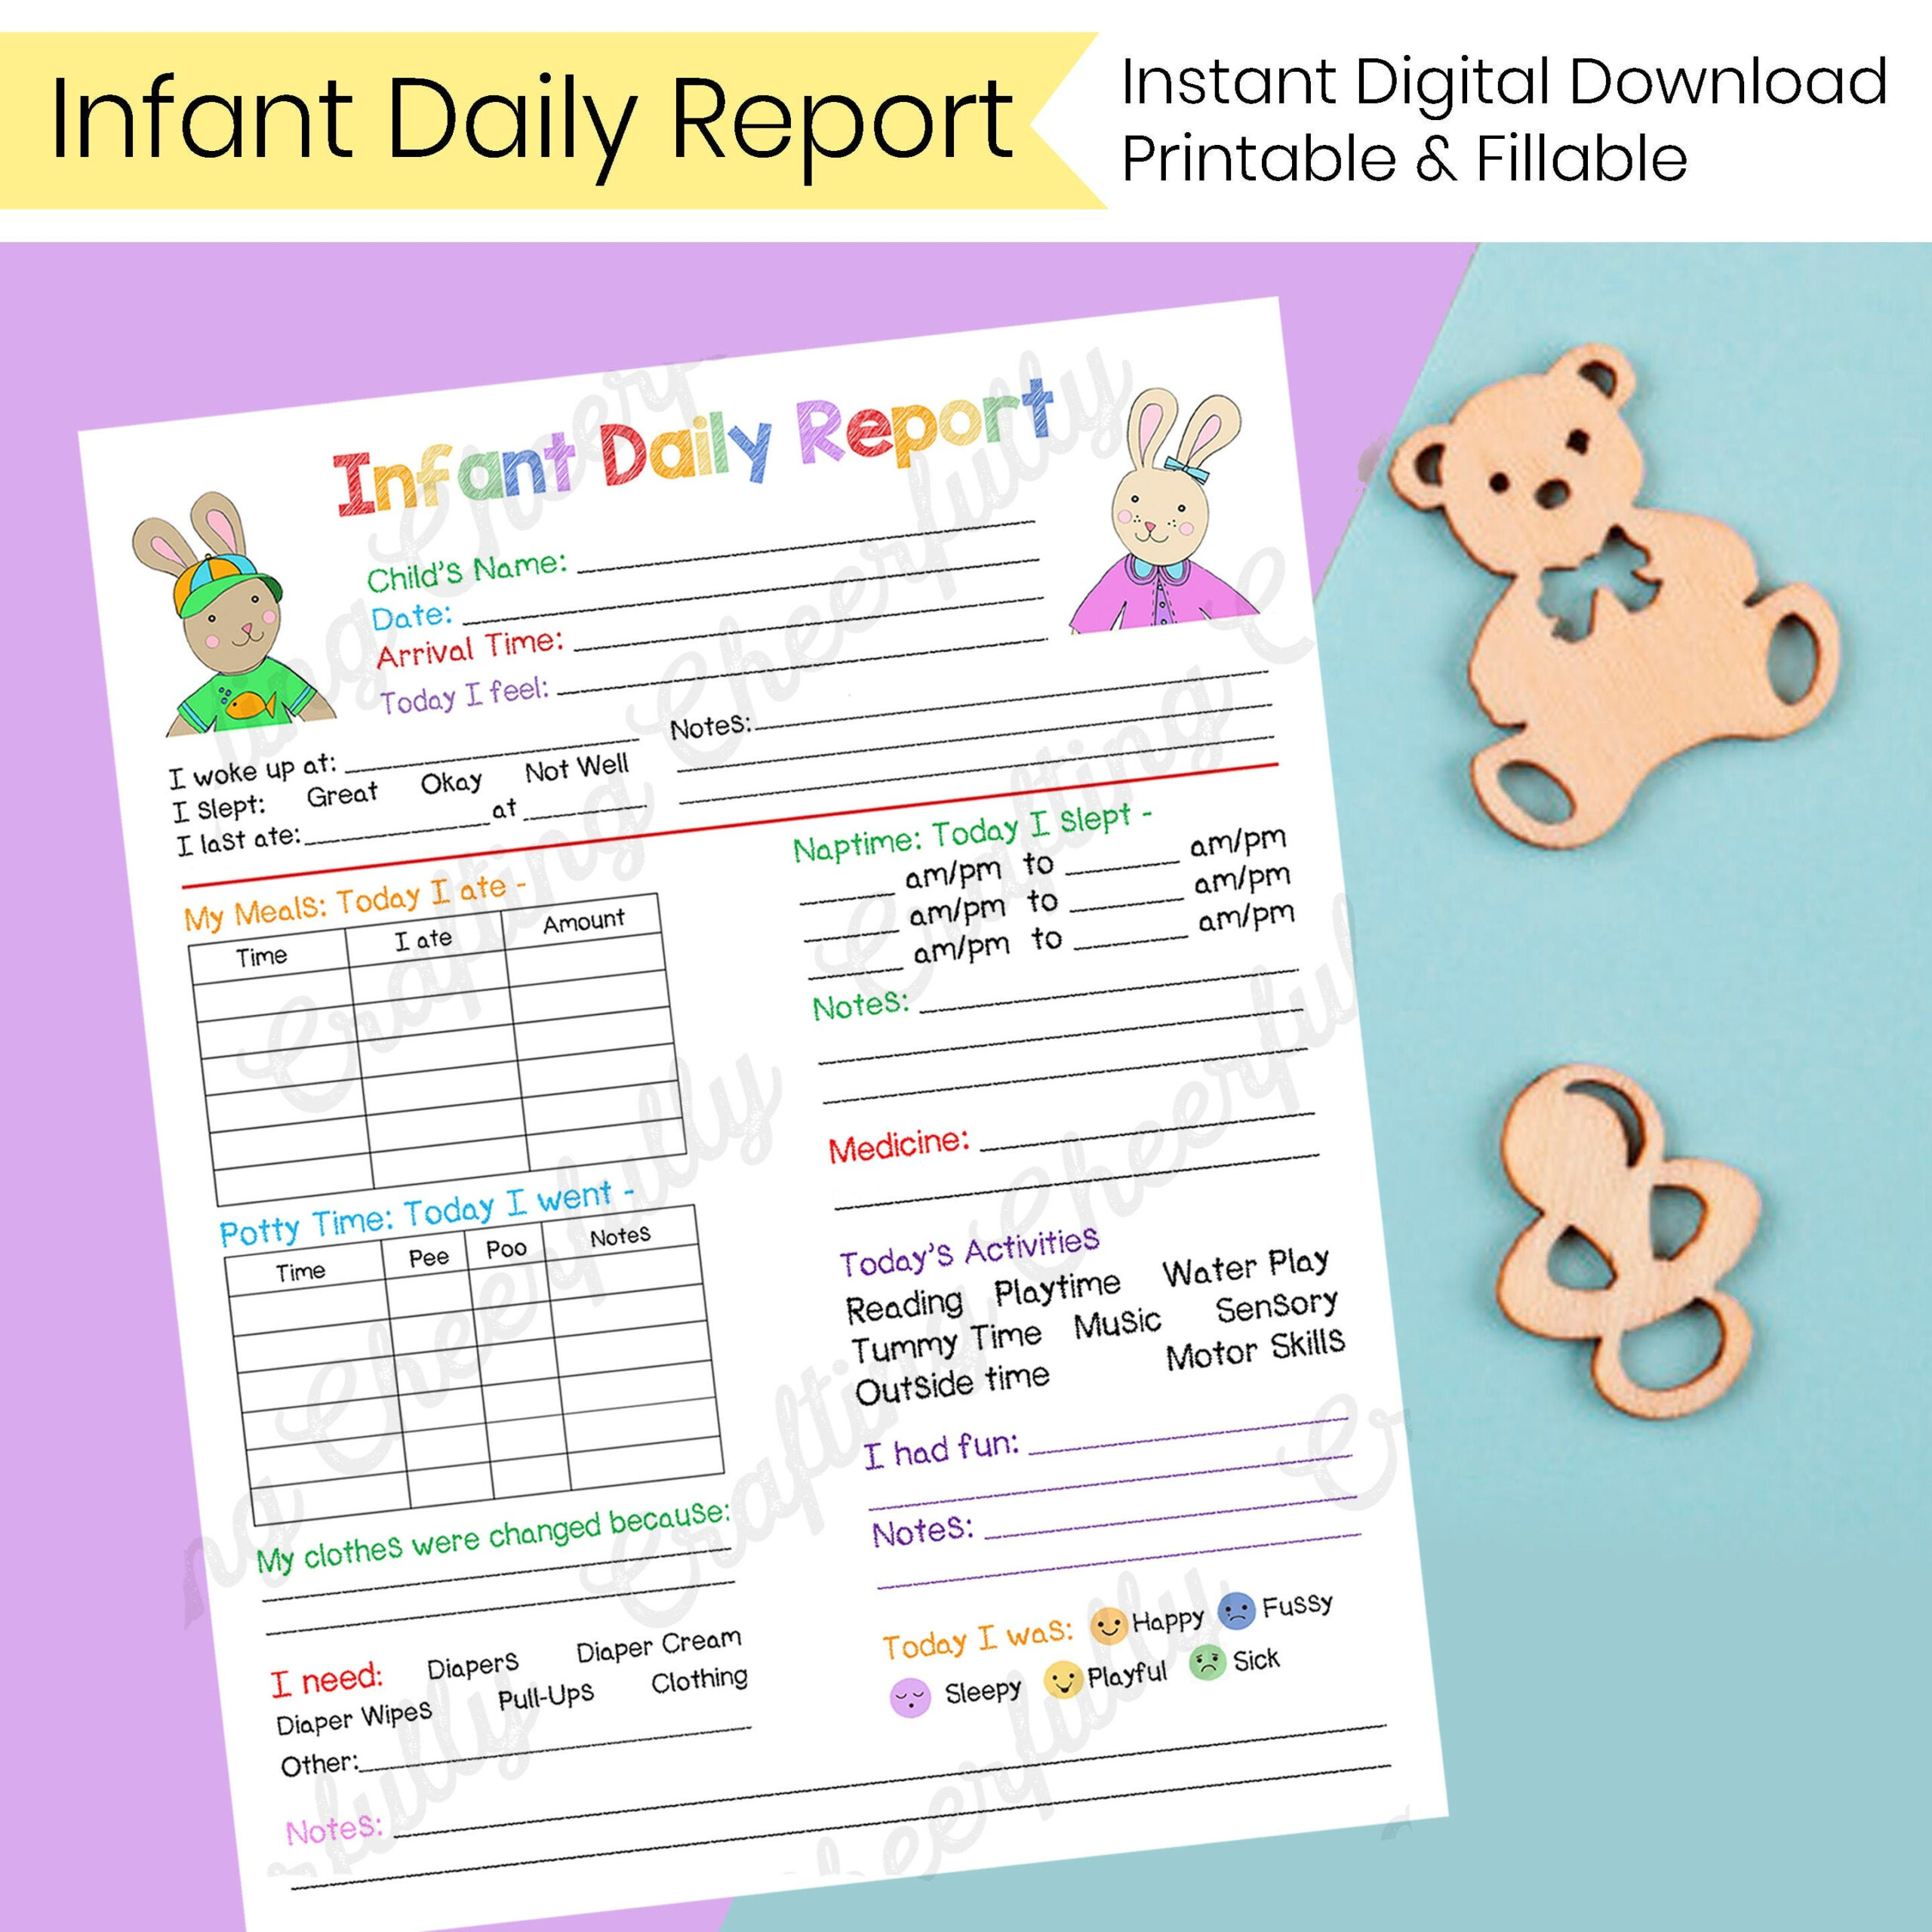 Infant Daily Report In-home Preschool Daycare Nanny Log - Etsy